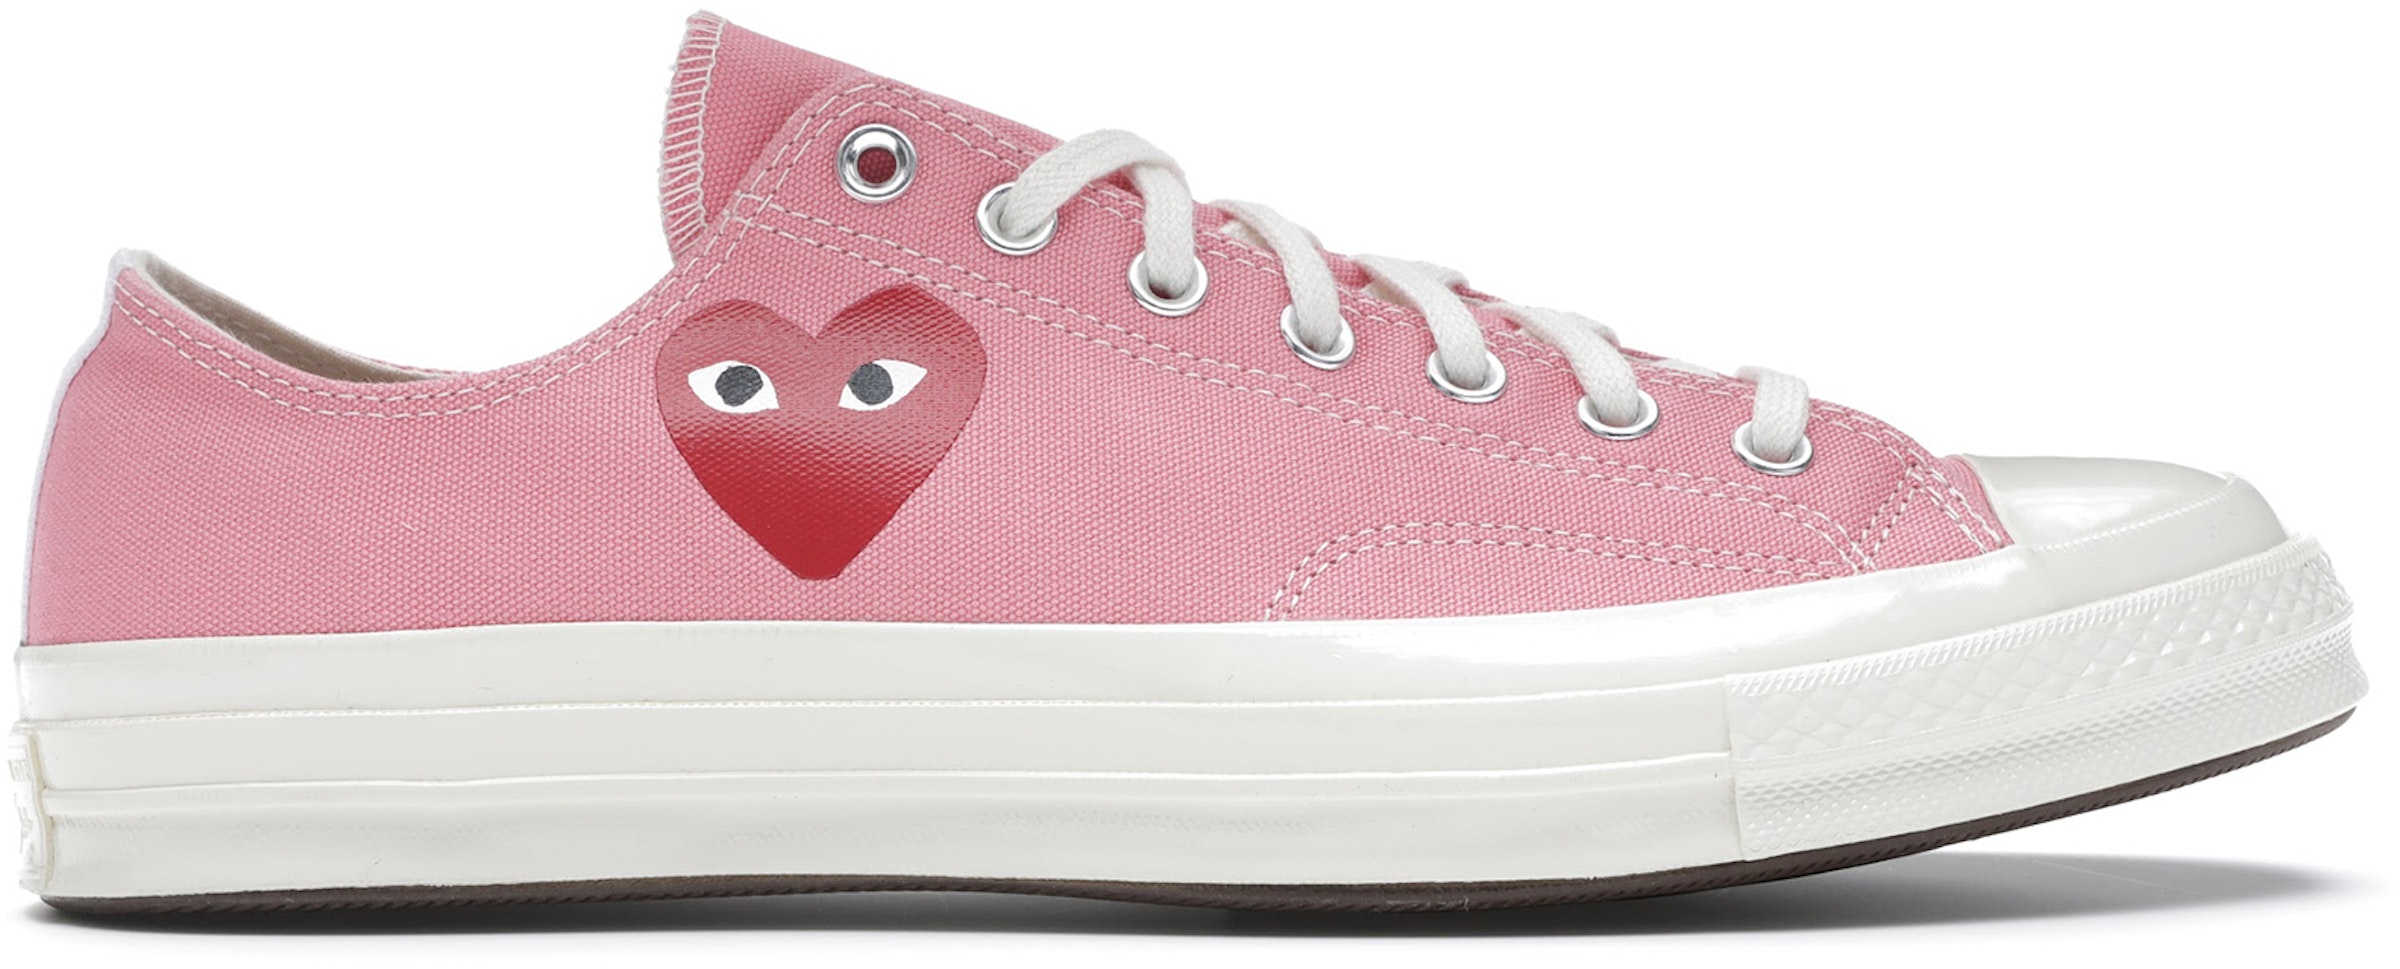 Converse Taylor All-Star 70 Ox des Garcons Play Bright Pink Men's - 168304C - US